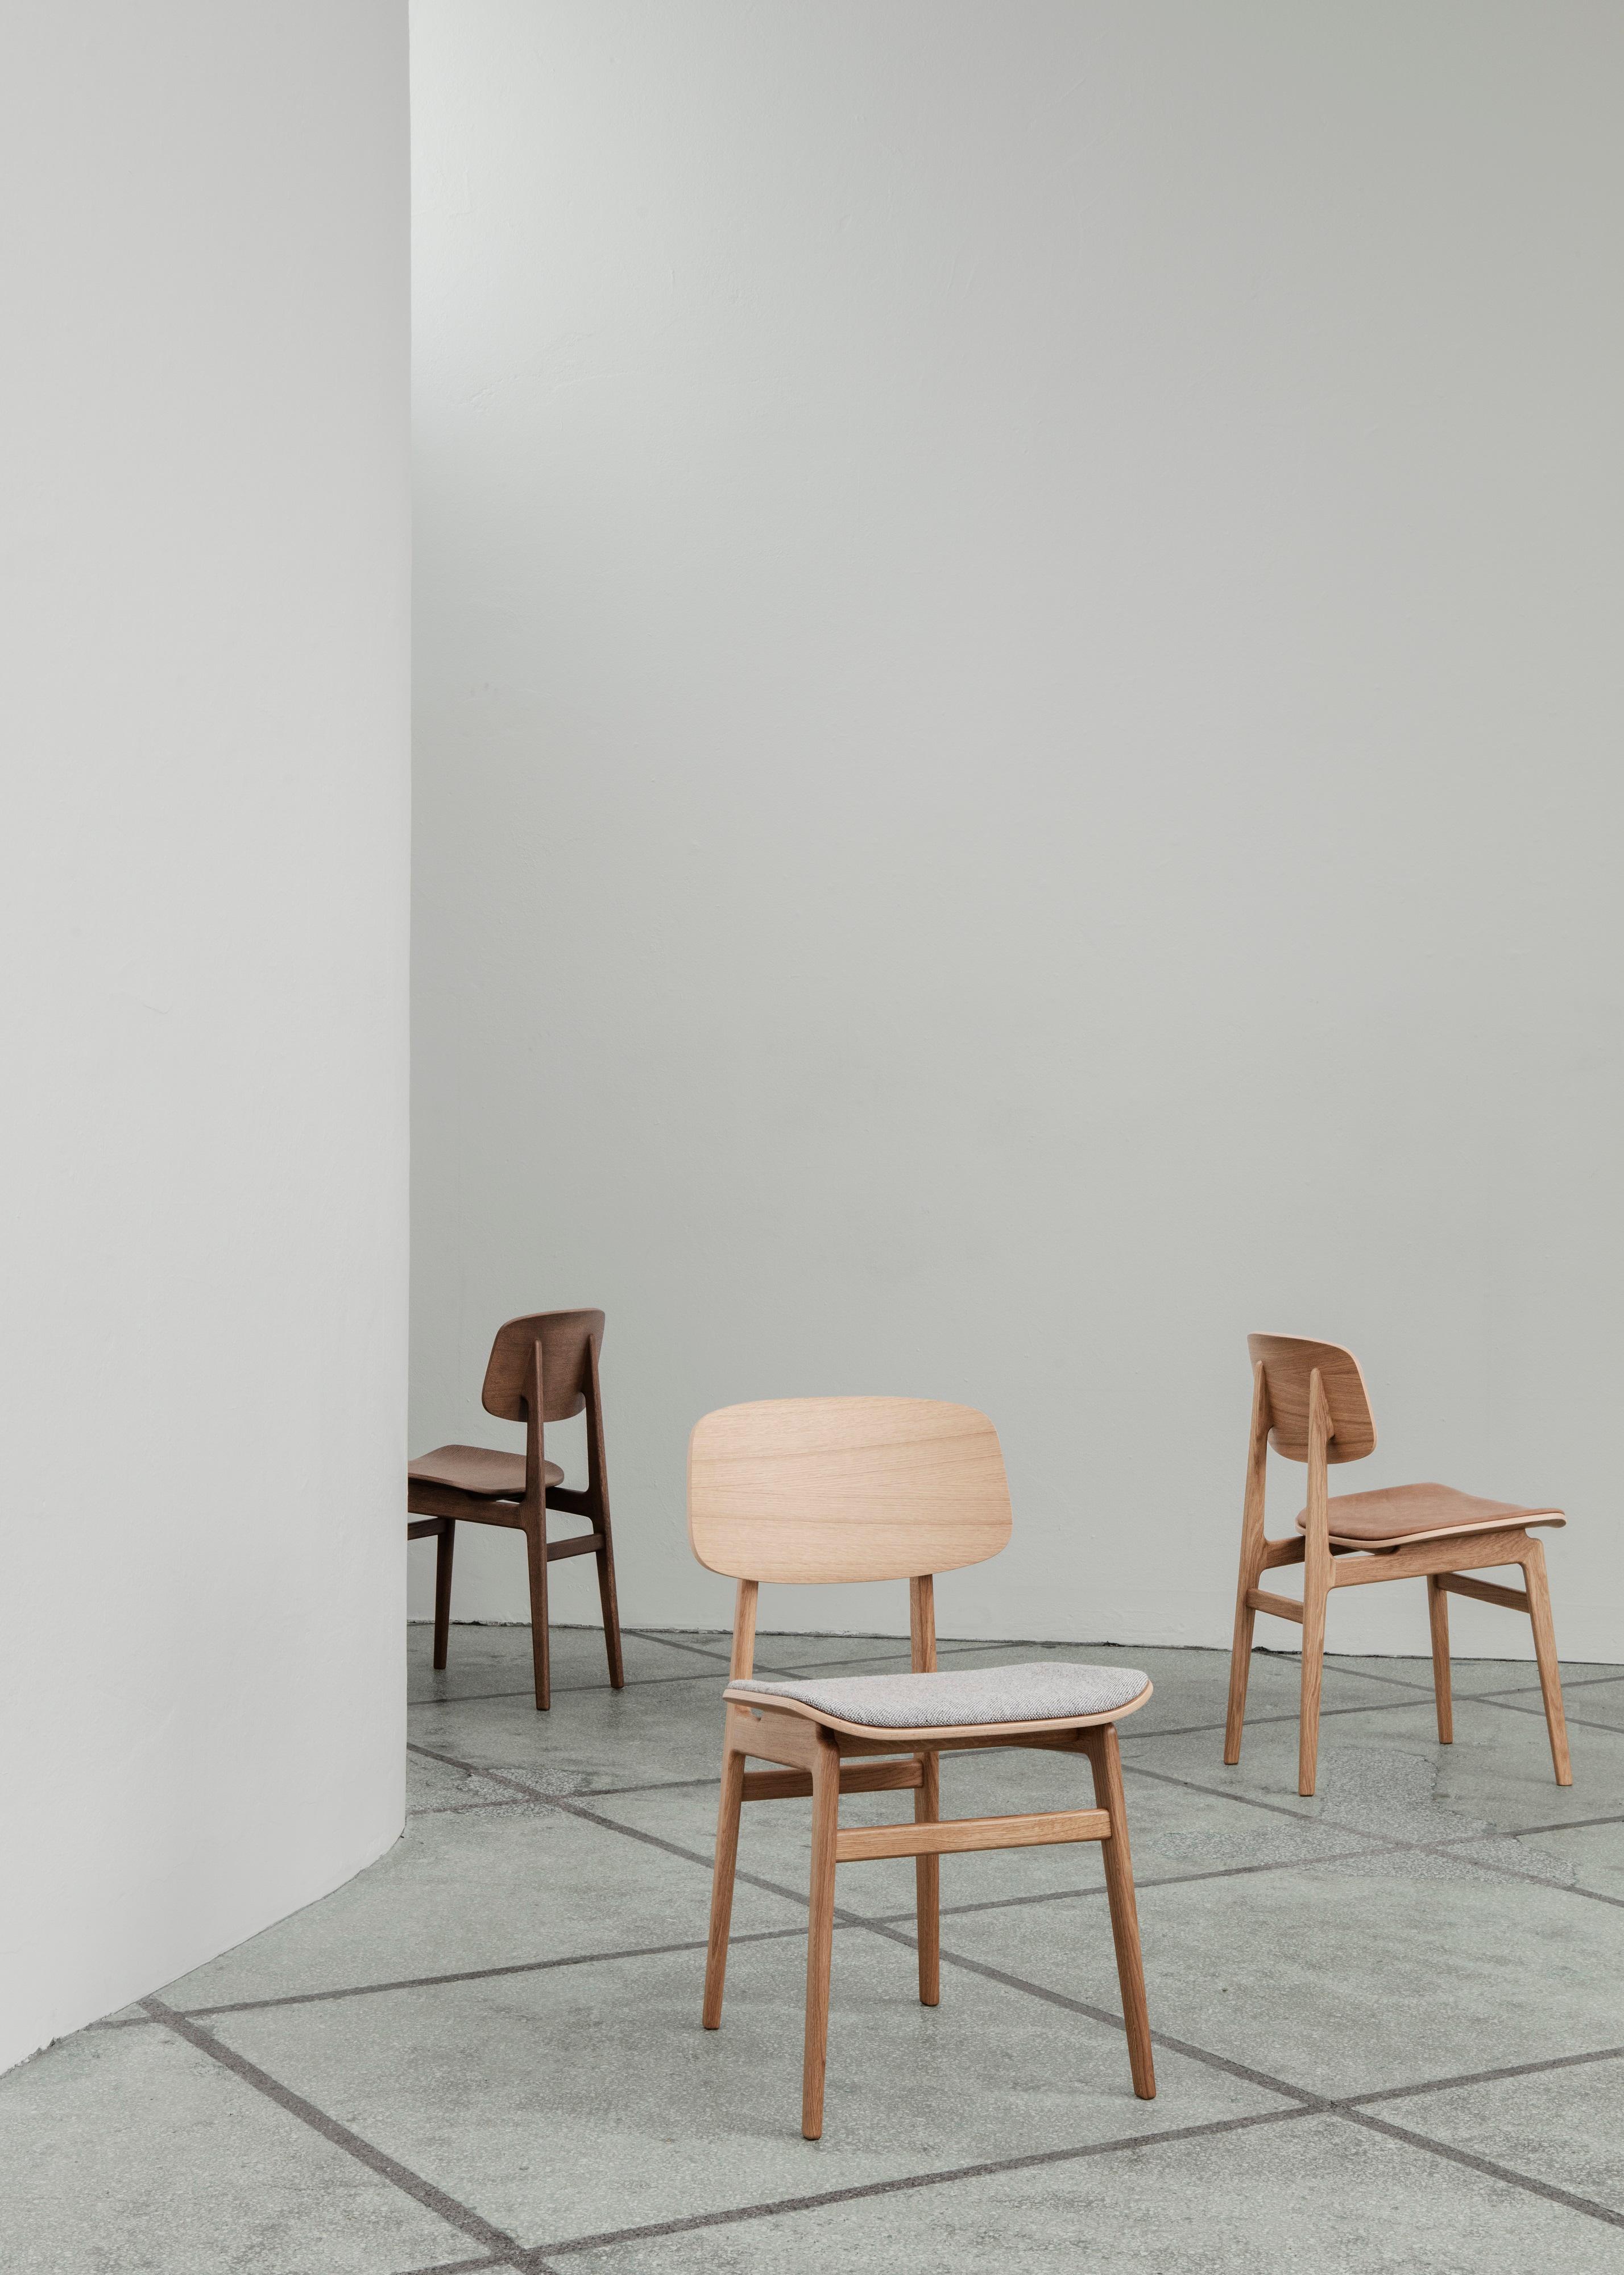 NY11 Chair by NORR11
Dimensions: D 52 x W 45,5 x H 78 cm. SH 45,5 cm / SH w. upholstery 46,5 cm.
Materials: Light smoked oak and upholstery.
Upholstery: Canvas 926.

Available in different oak finishes: Natural oak, light smoked oak, dark smoked